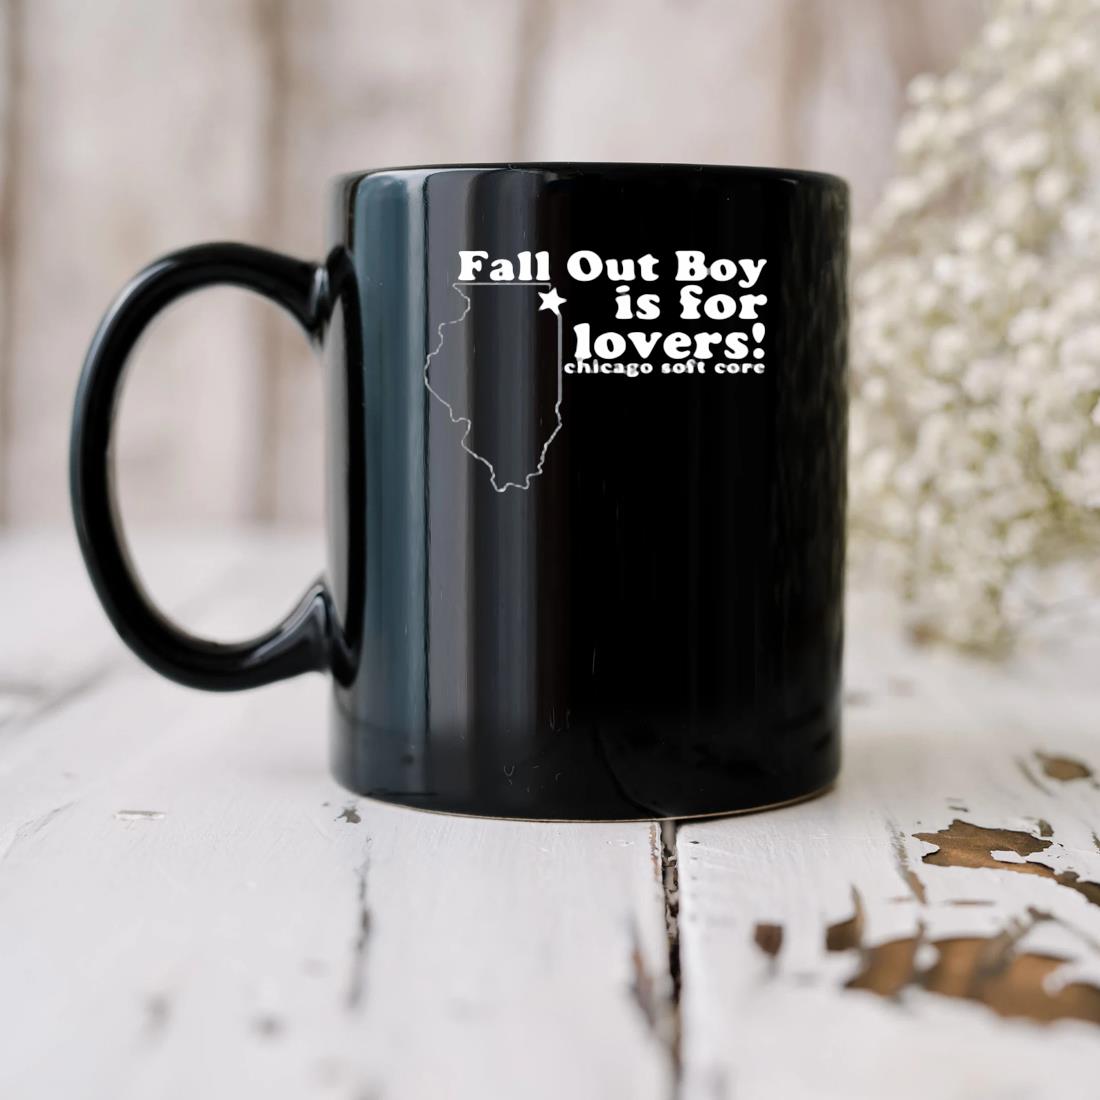 Fall Out Boy Is For Lovers Chicago Soft Core Mug